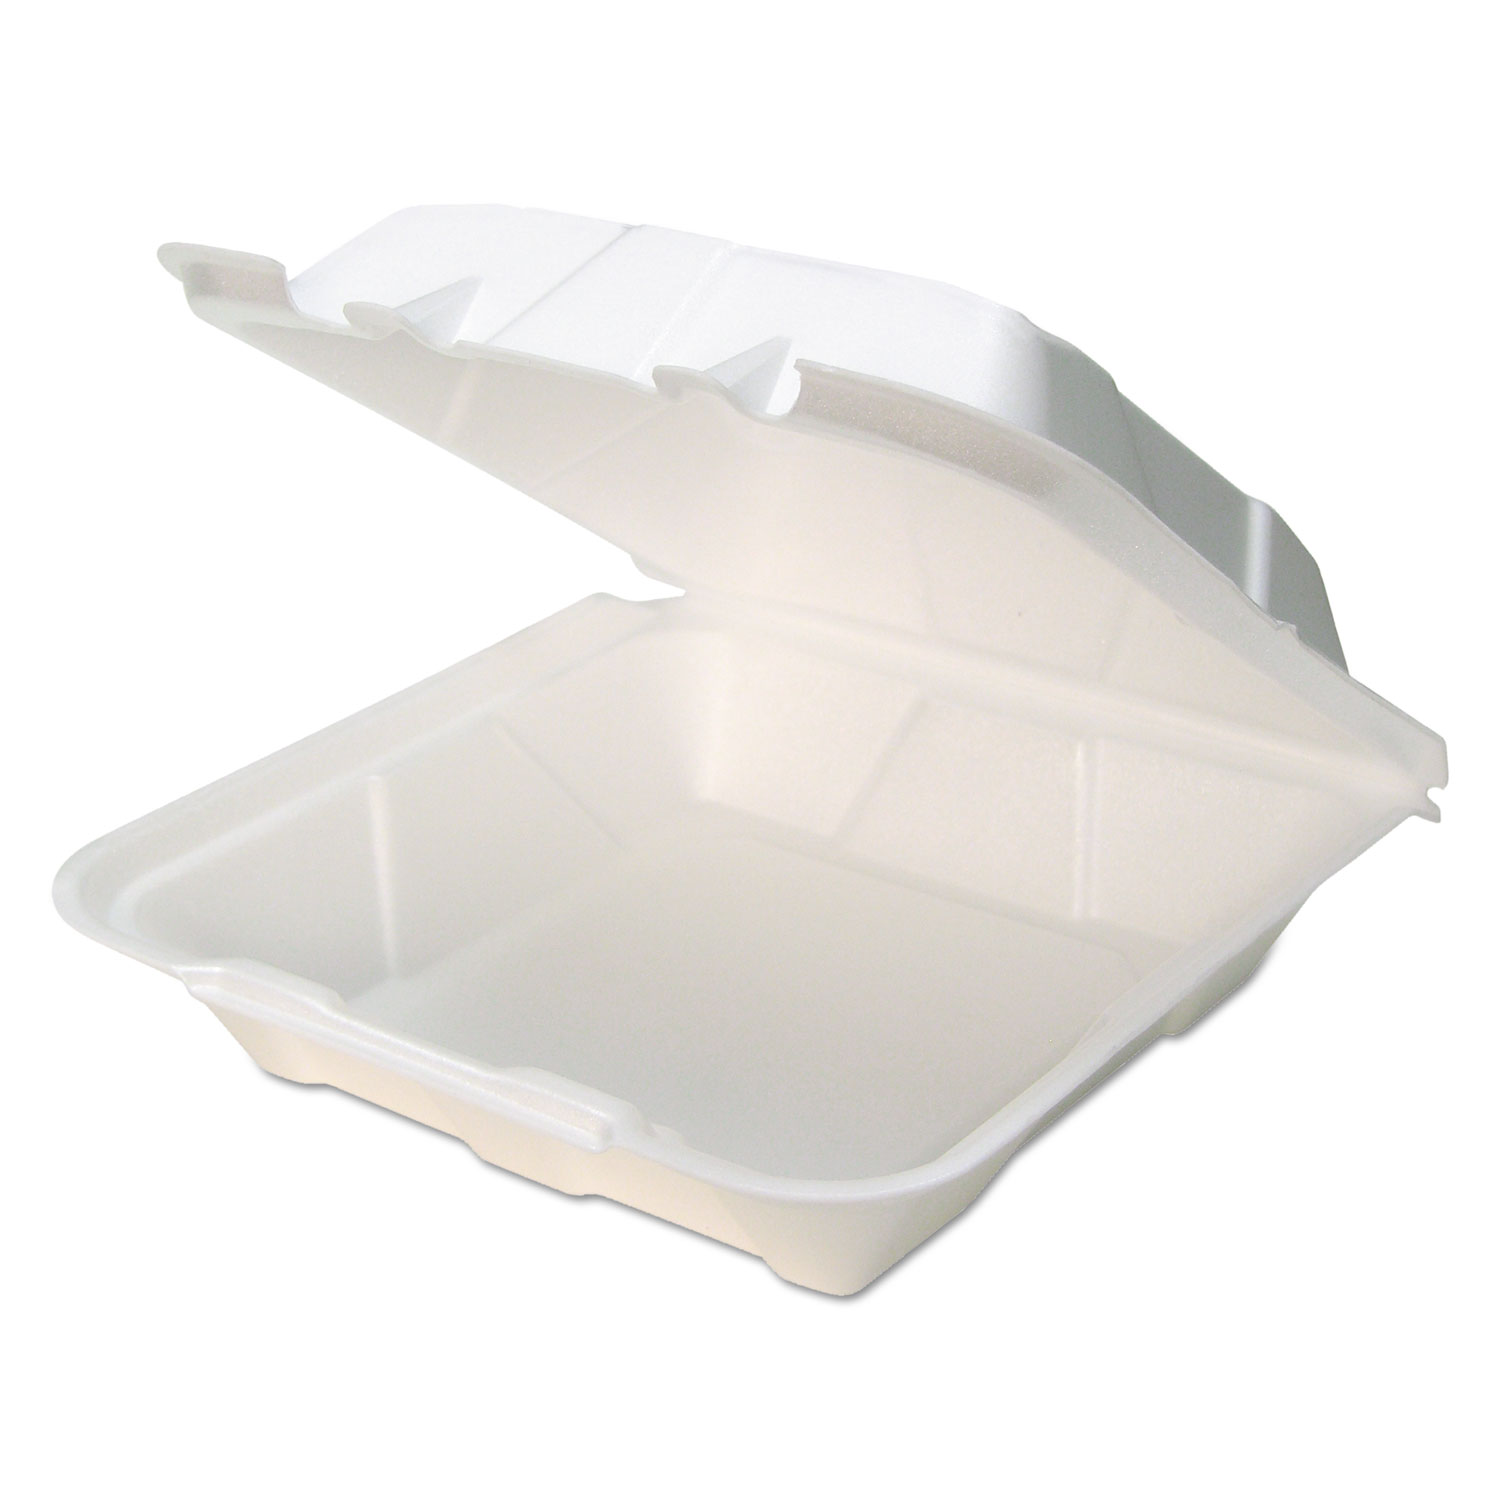  Pactiv YTD199010000 Foam Hinged Lid Containers, White, 9 x 9 x 3.5, 150/Carton (PCTYTD19901) 